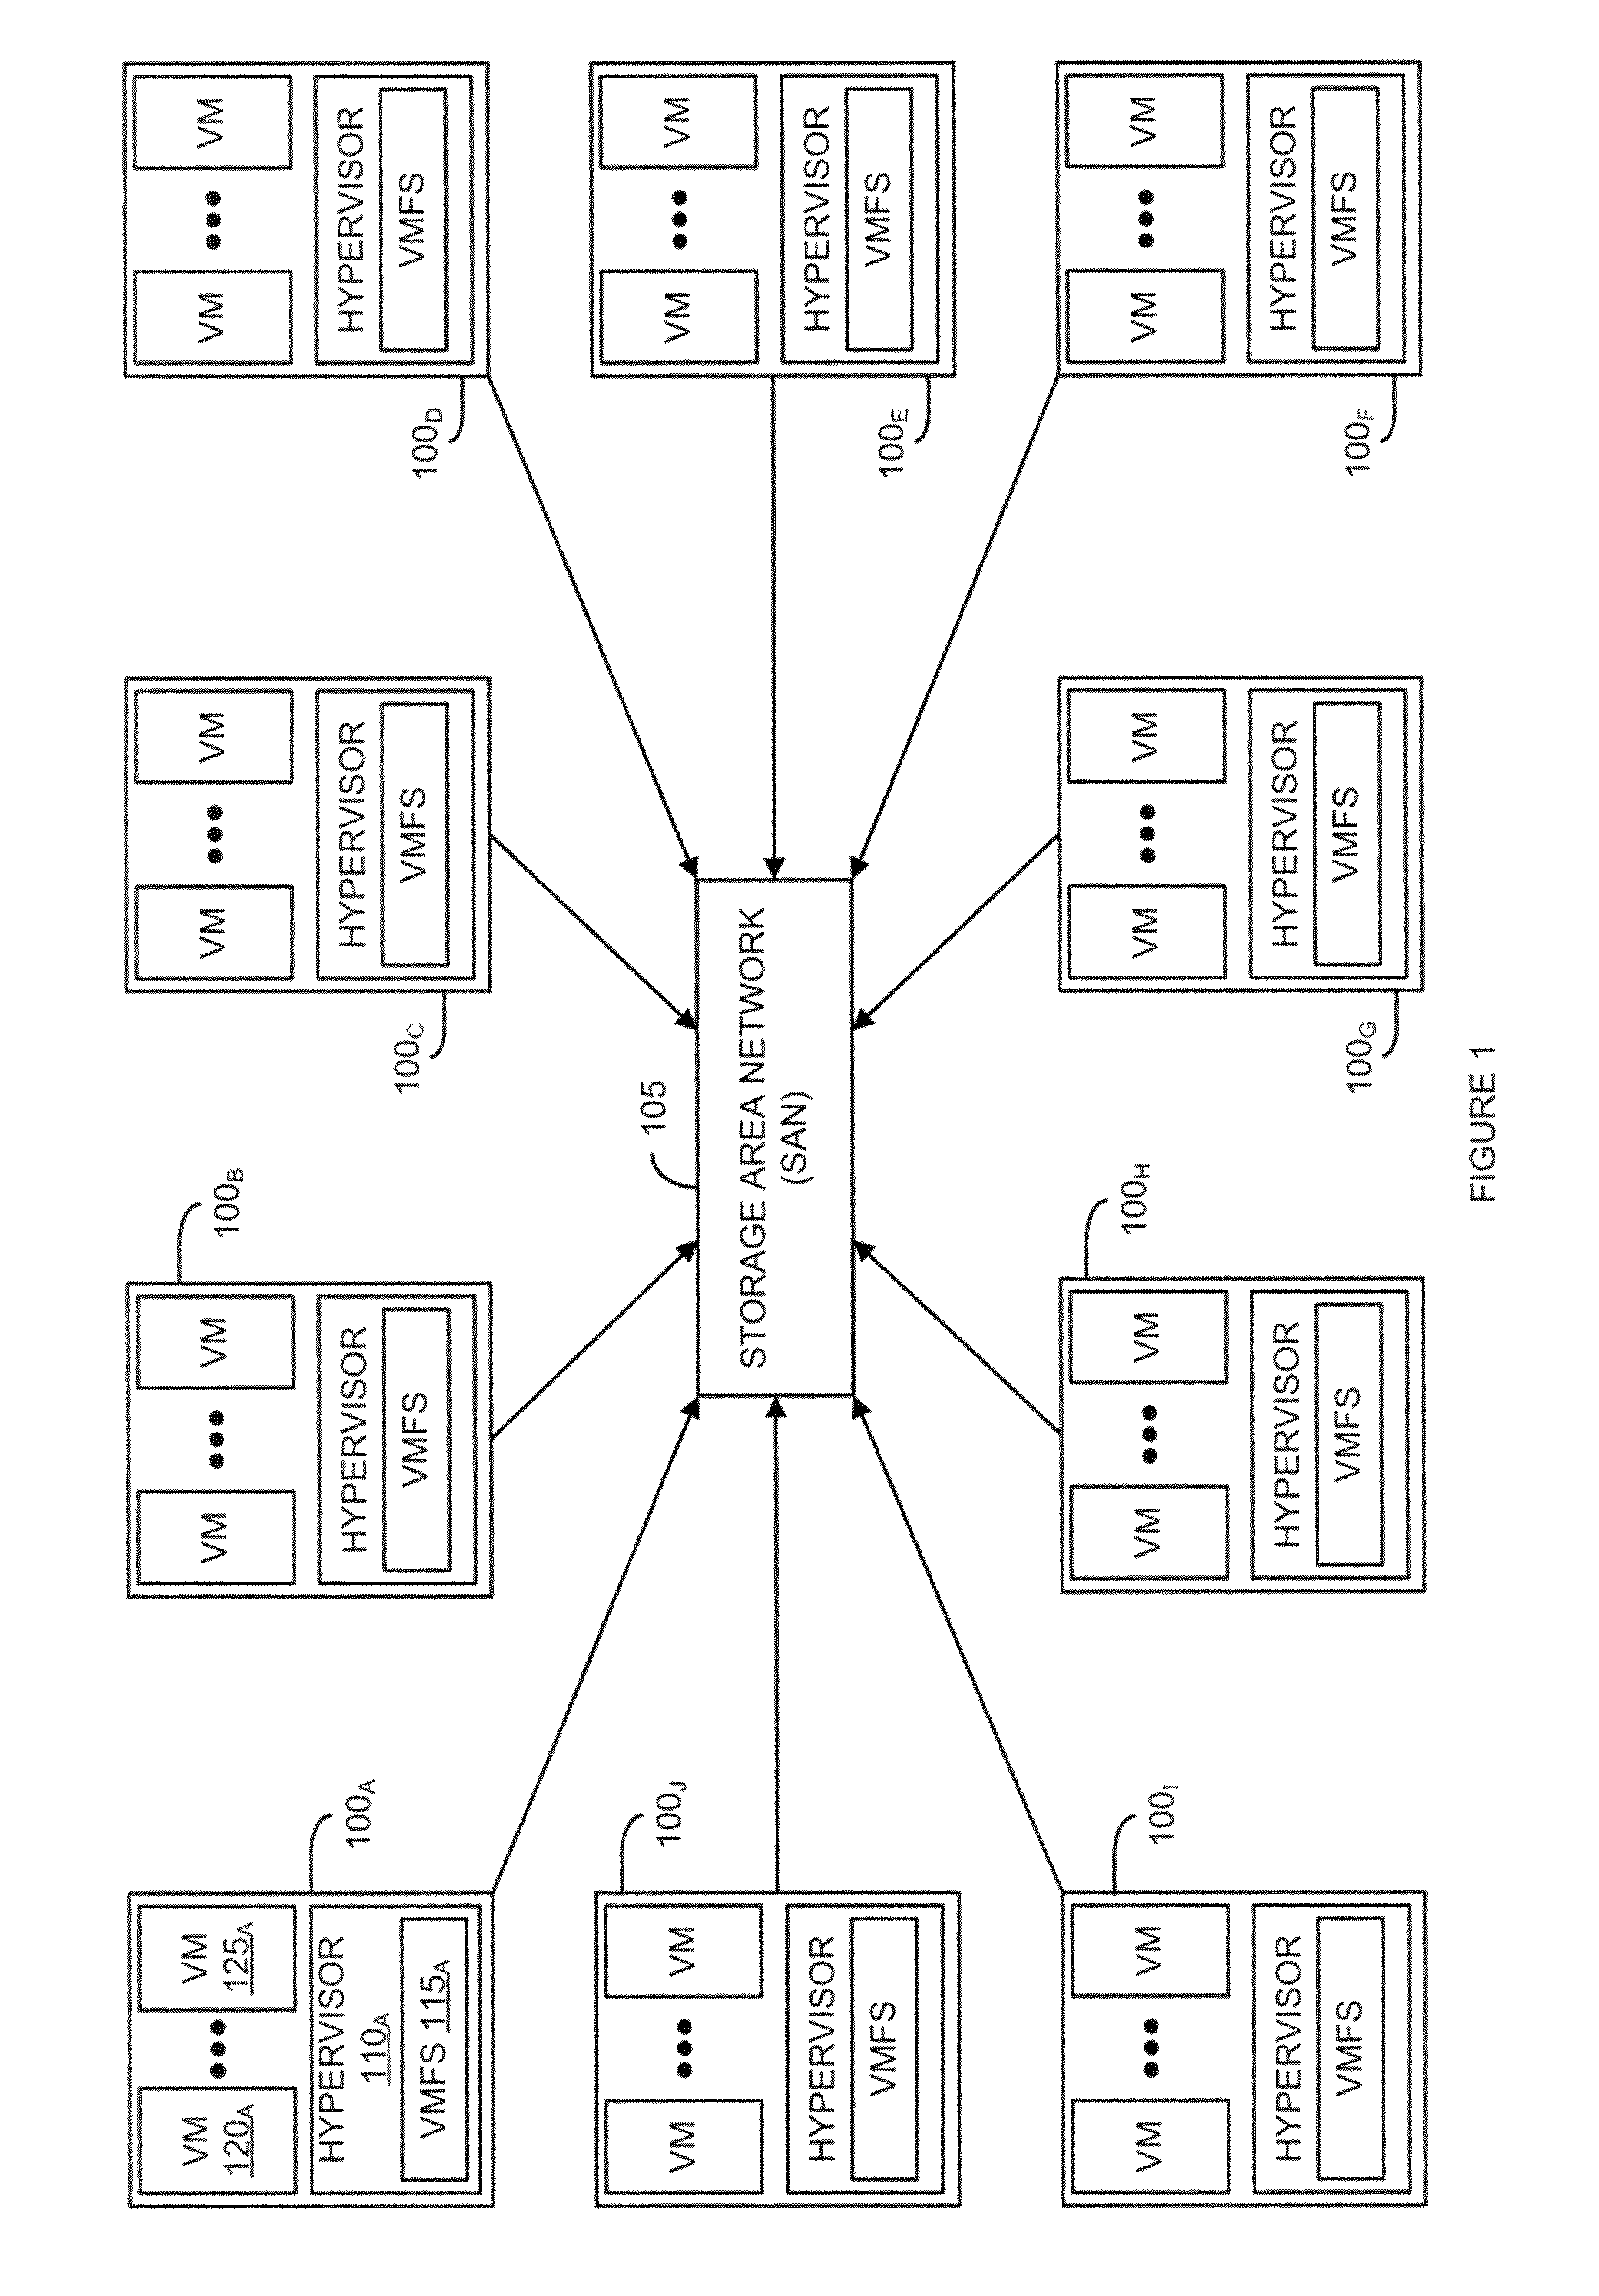 Method for voting with secret shares in a distributed system